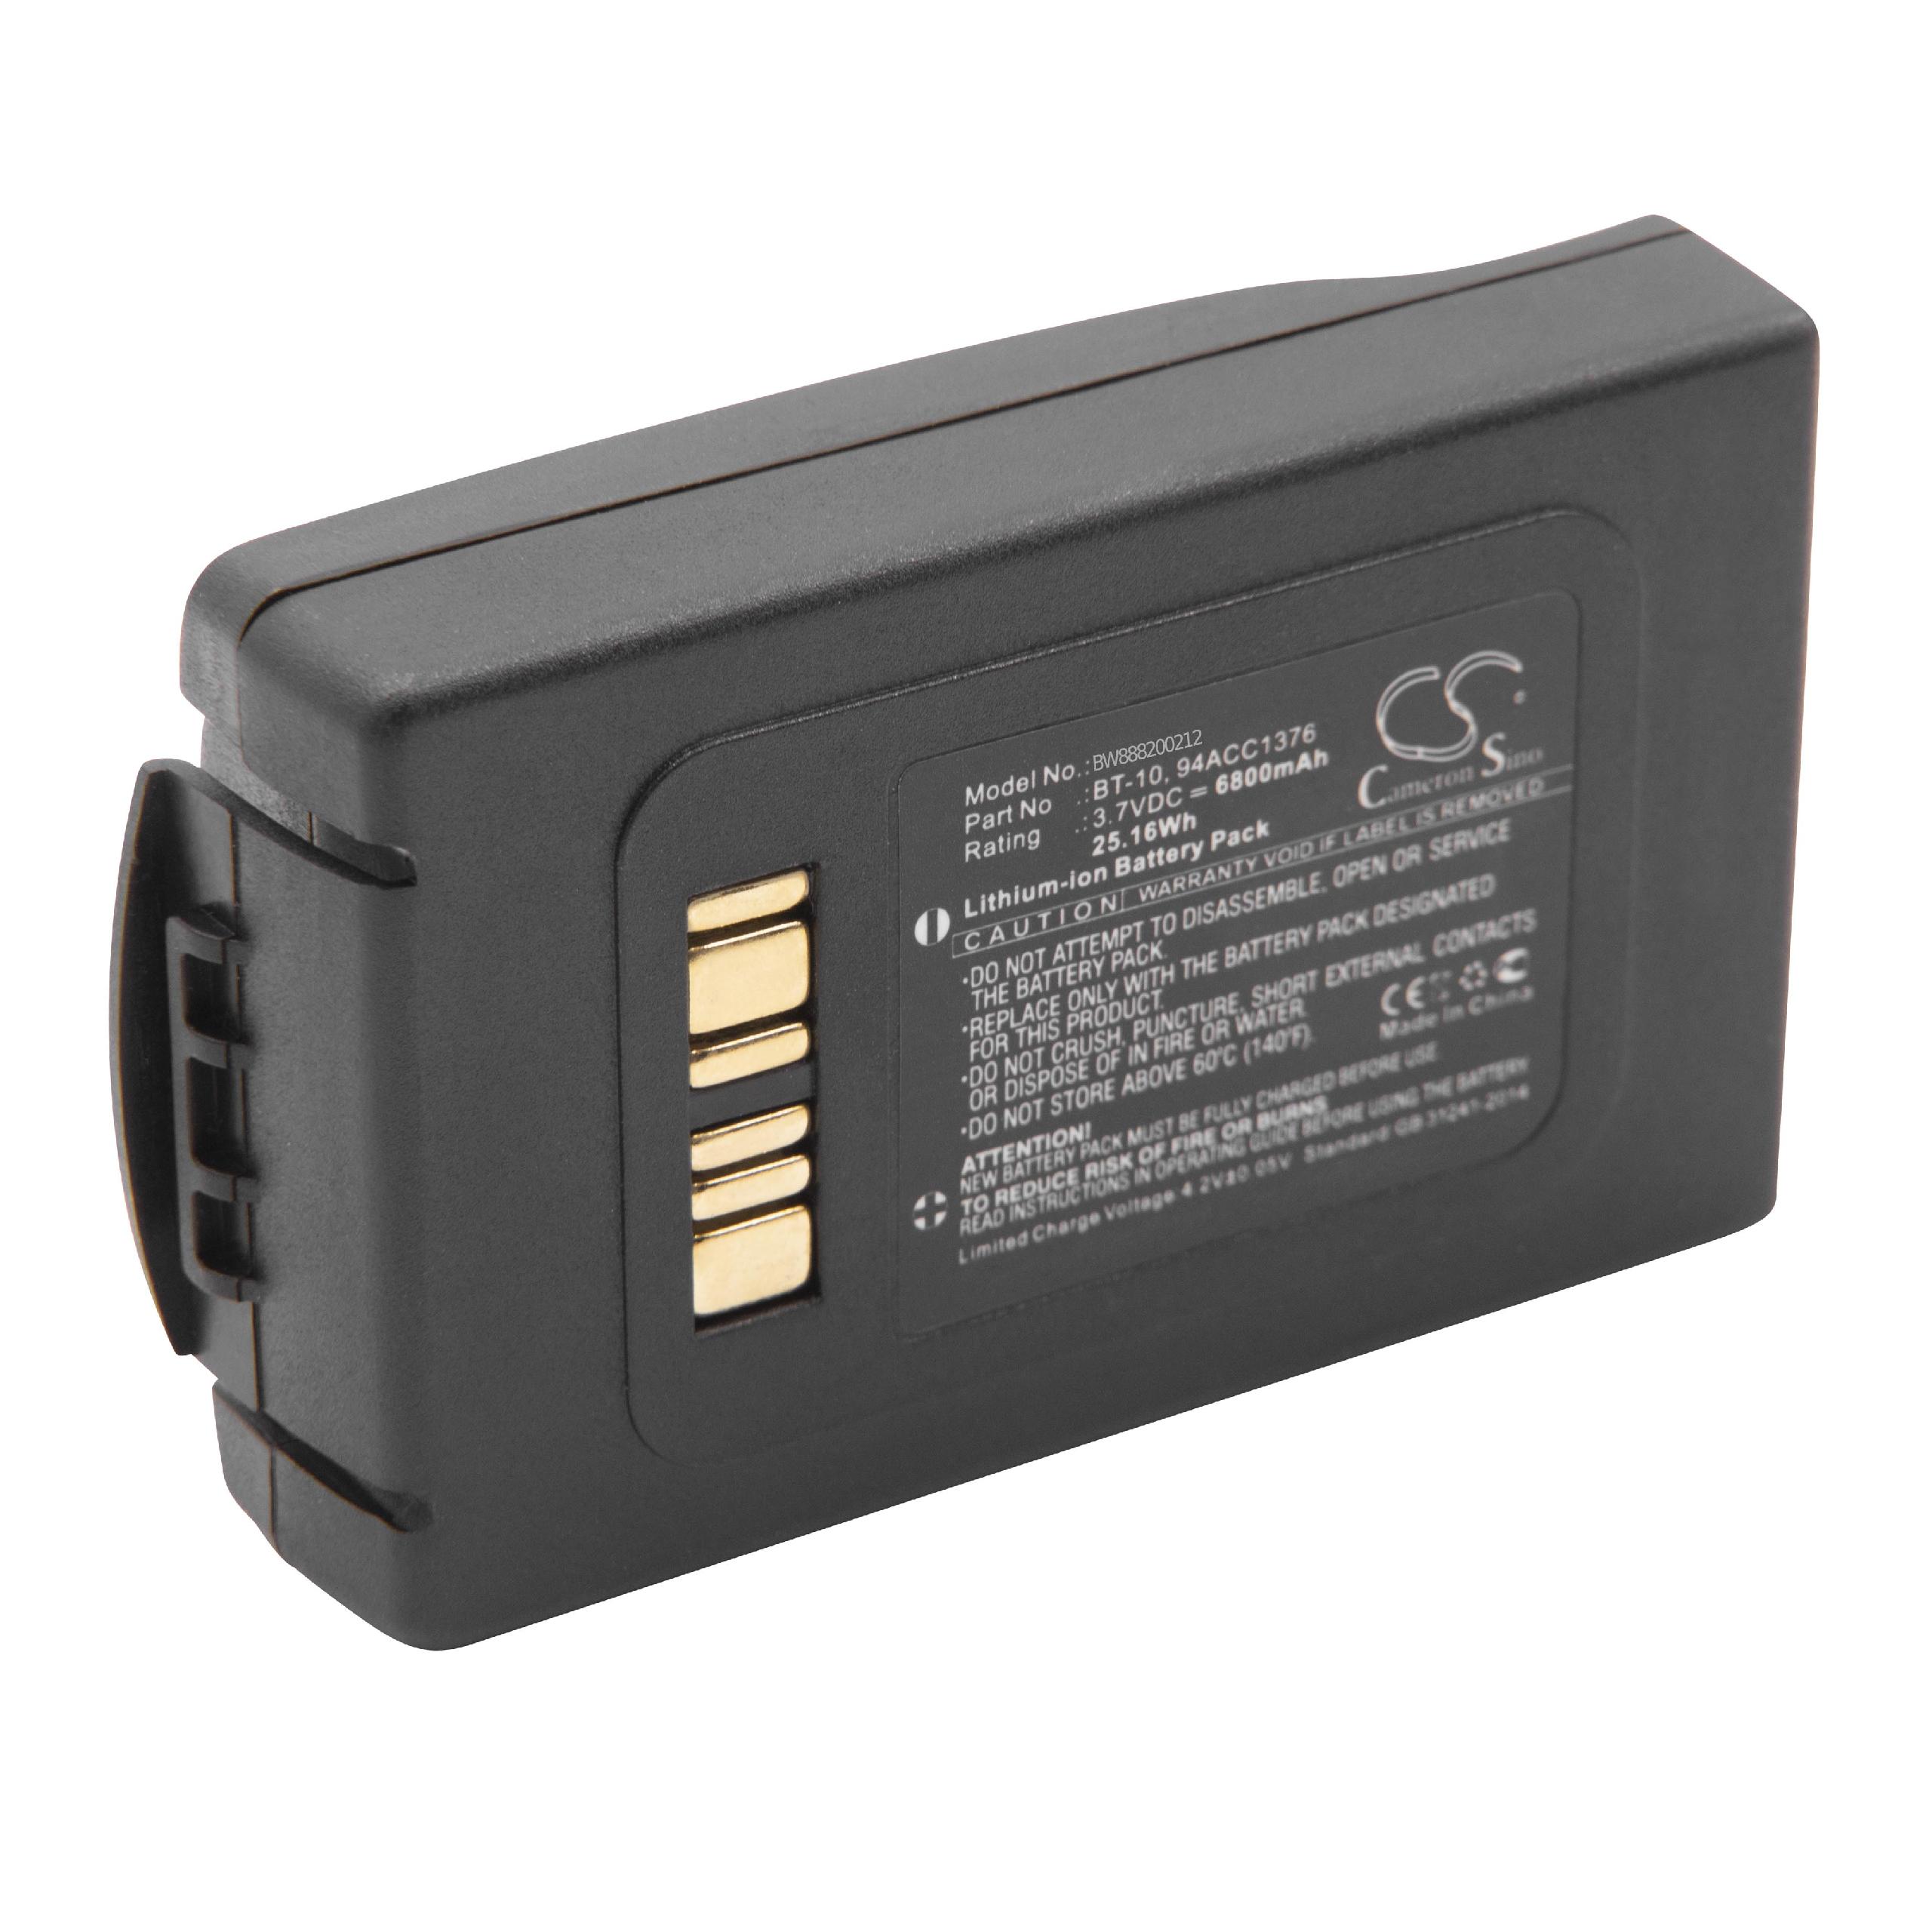 Barcode Scanner POS Battery Replacement for Datalogic 94ACC0112, 94ACC1376, 94ACC1377 - 6800mAh 3.7V Li-Ion